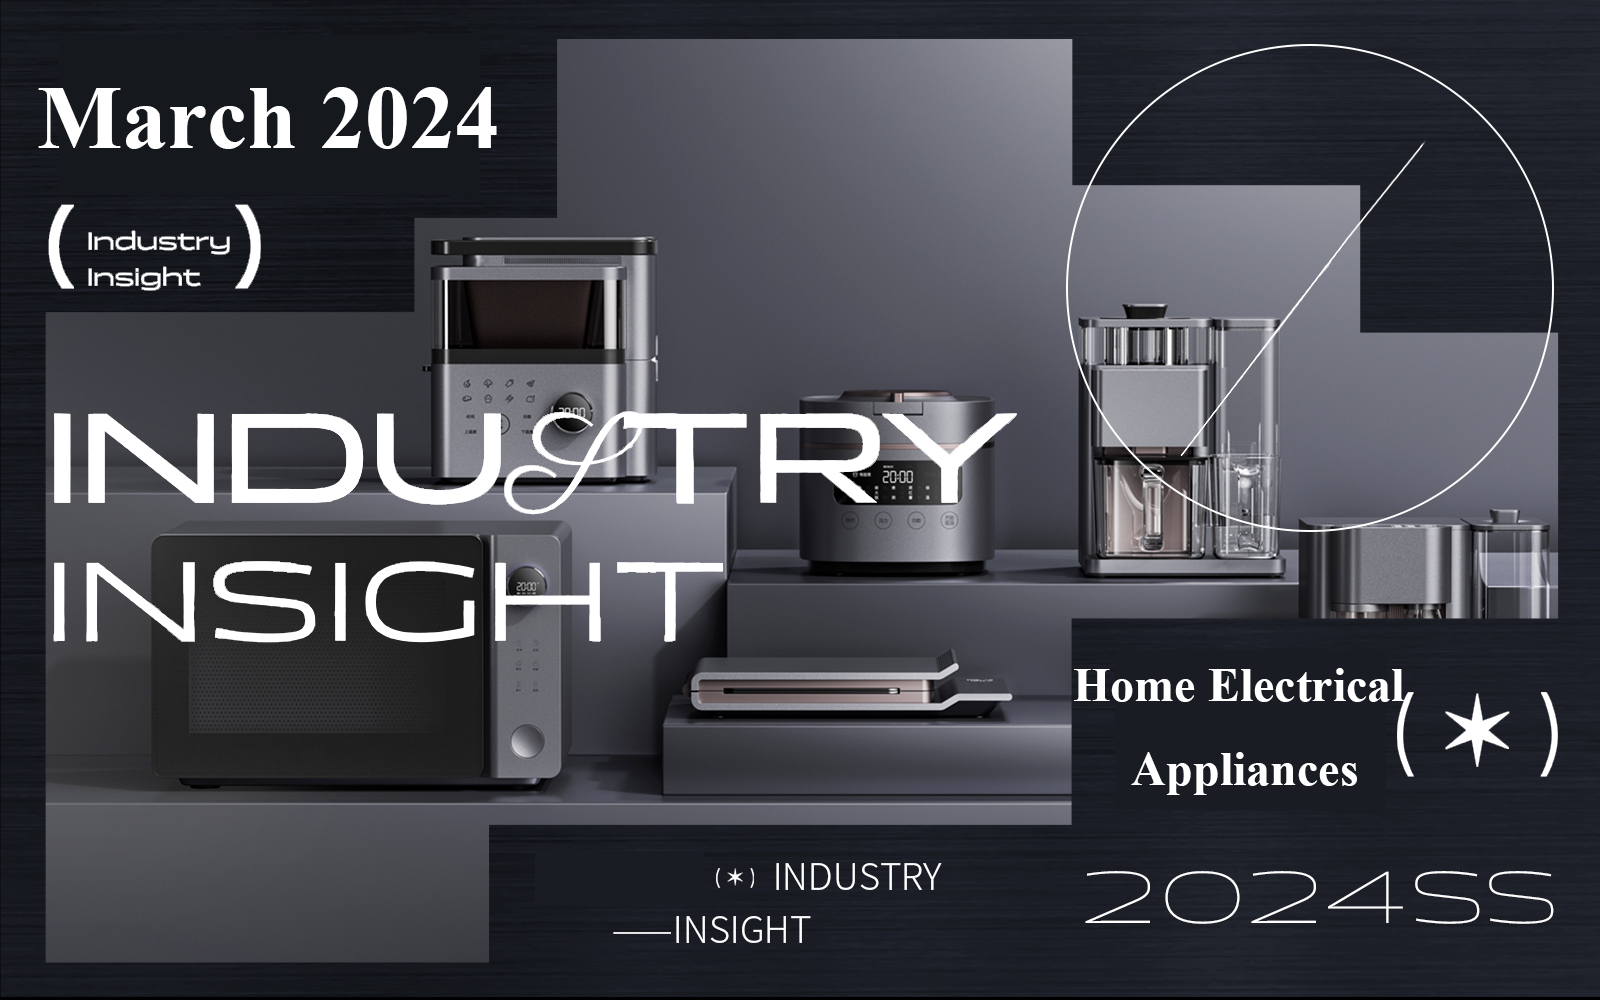 March 2024 -- The CMF Industry Insight of Home Electrical Appliances